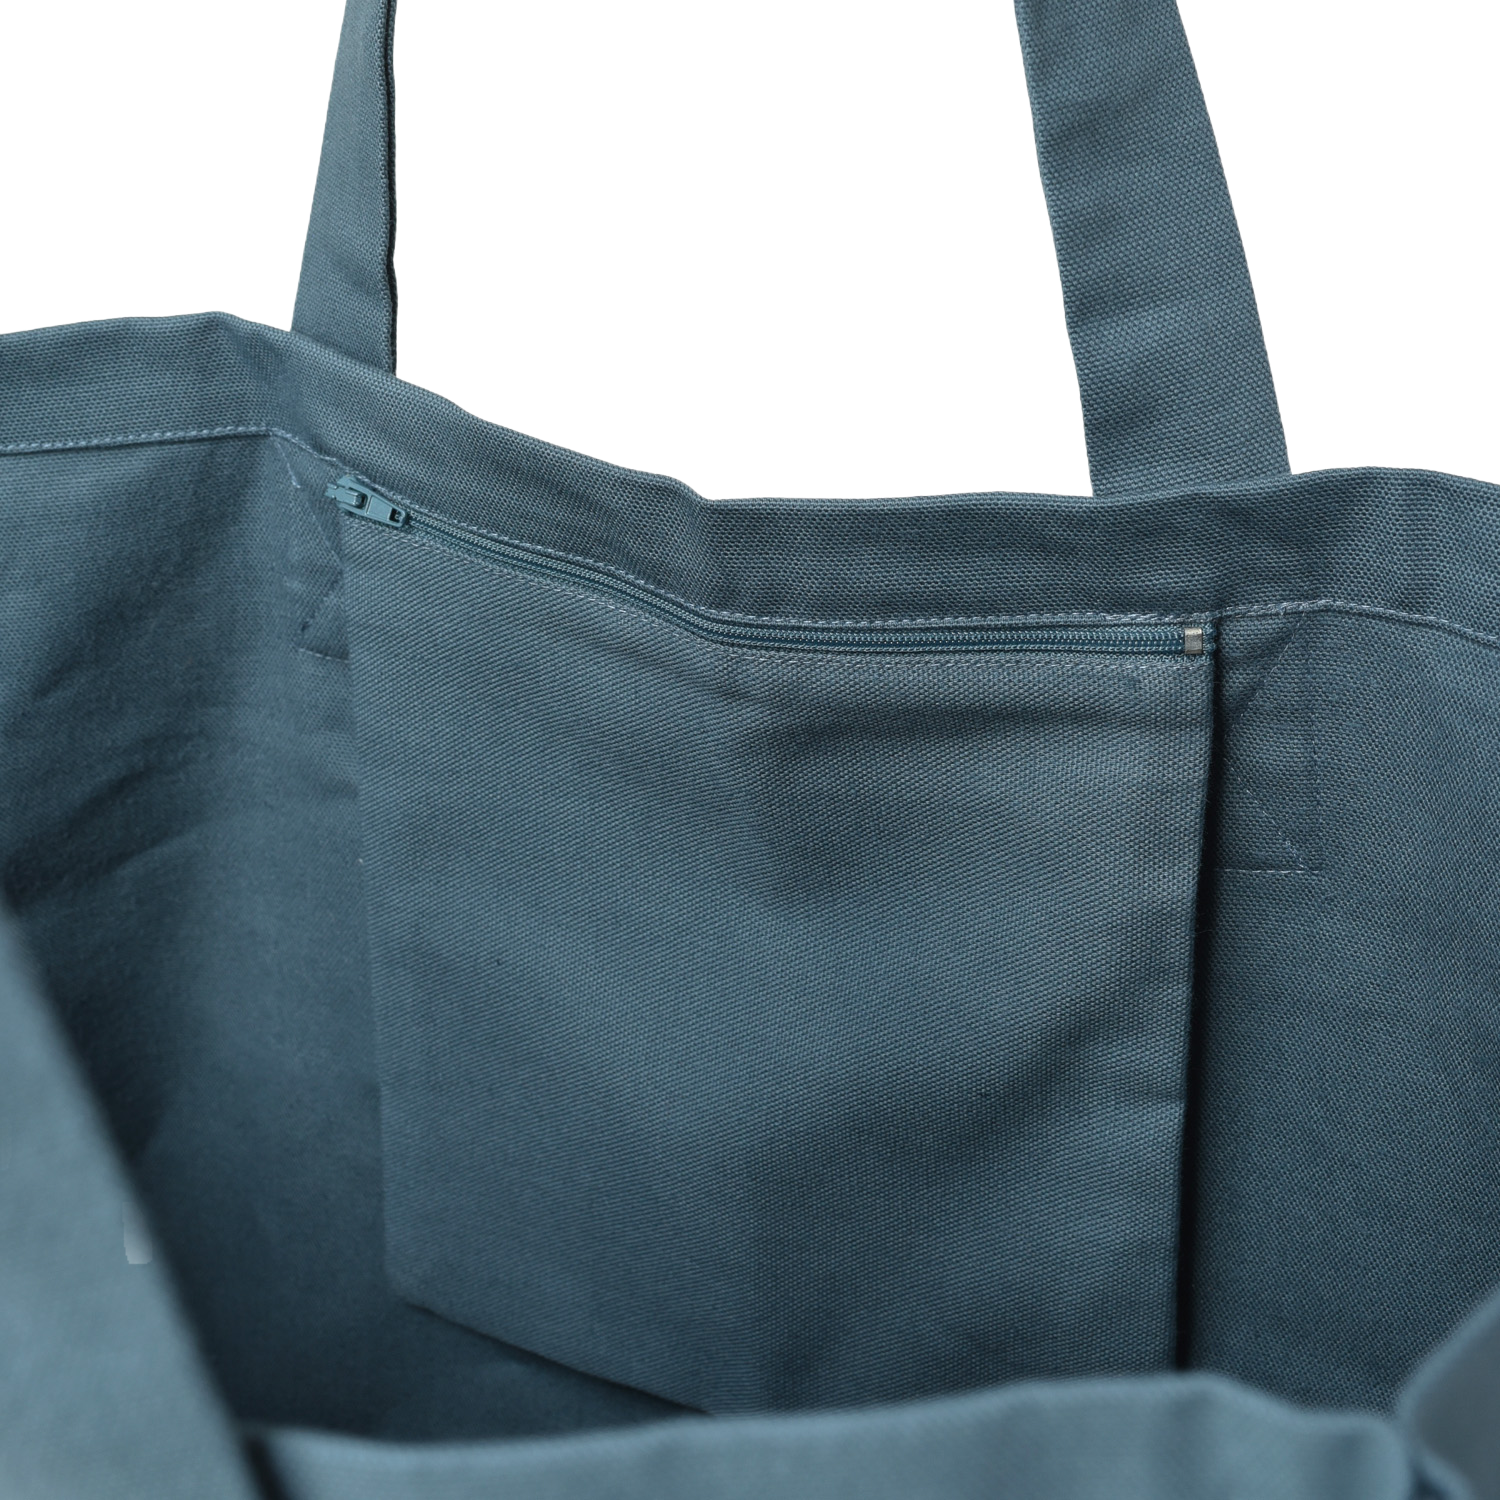 Large personalized tote bag